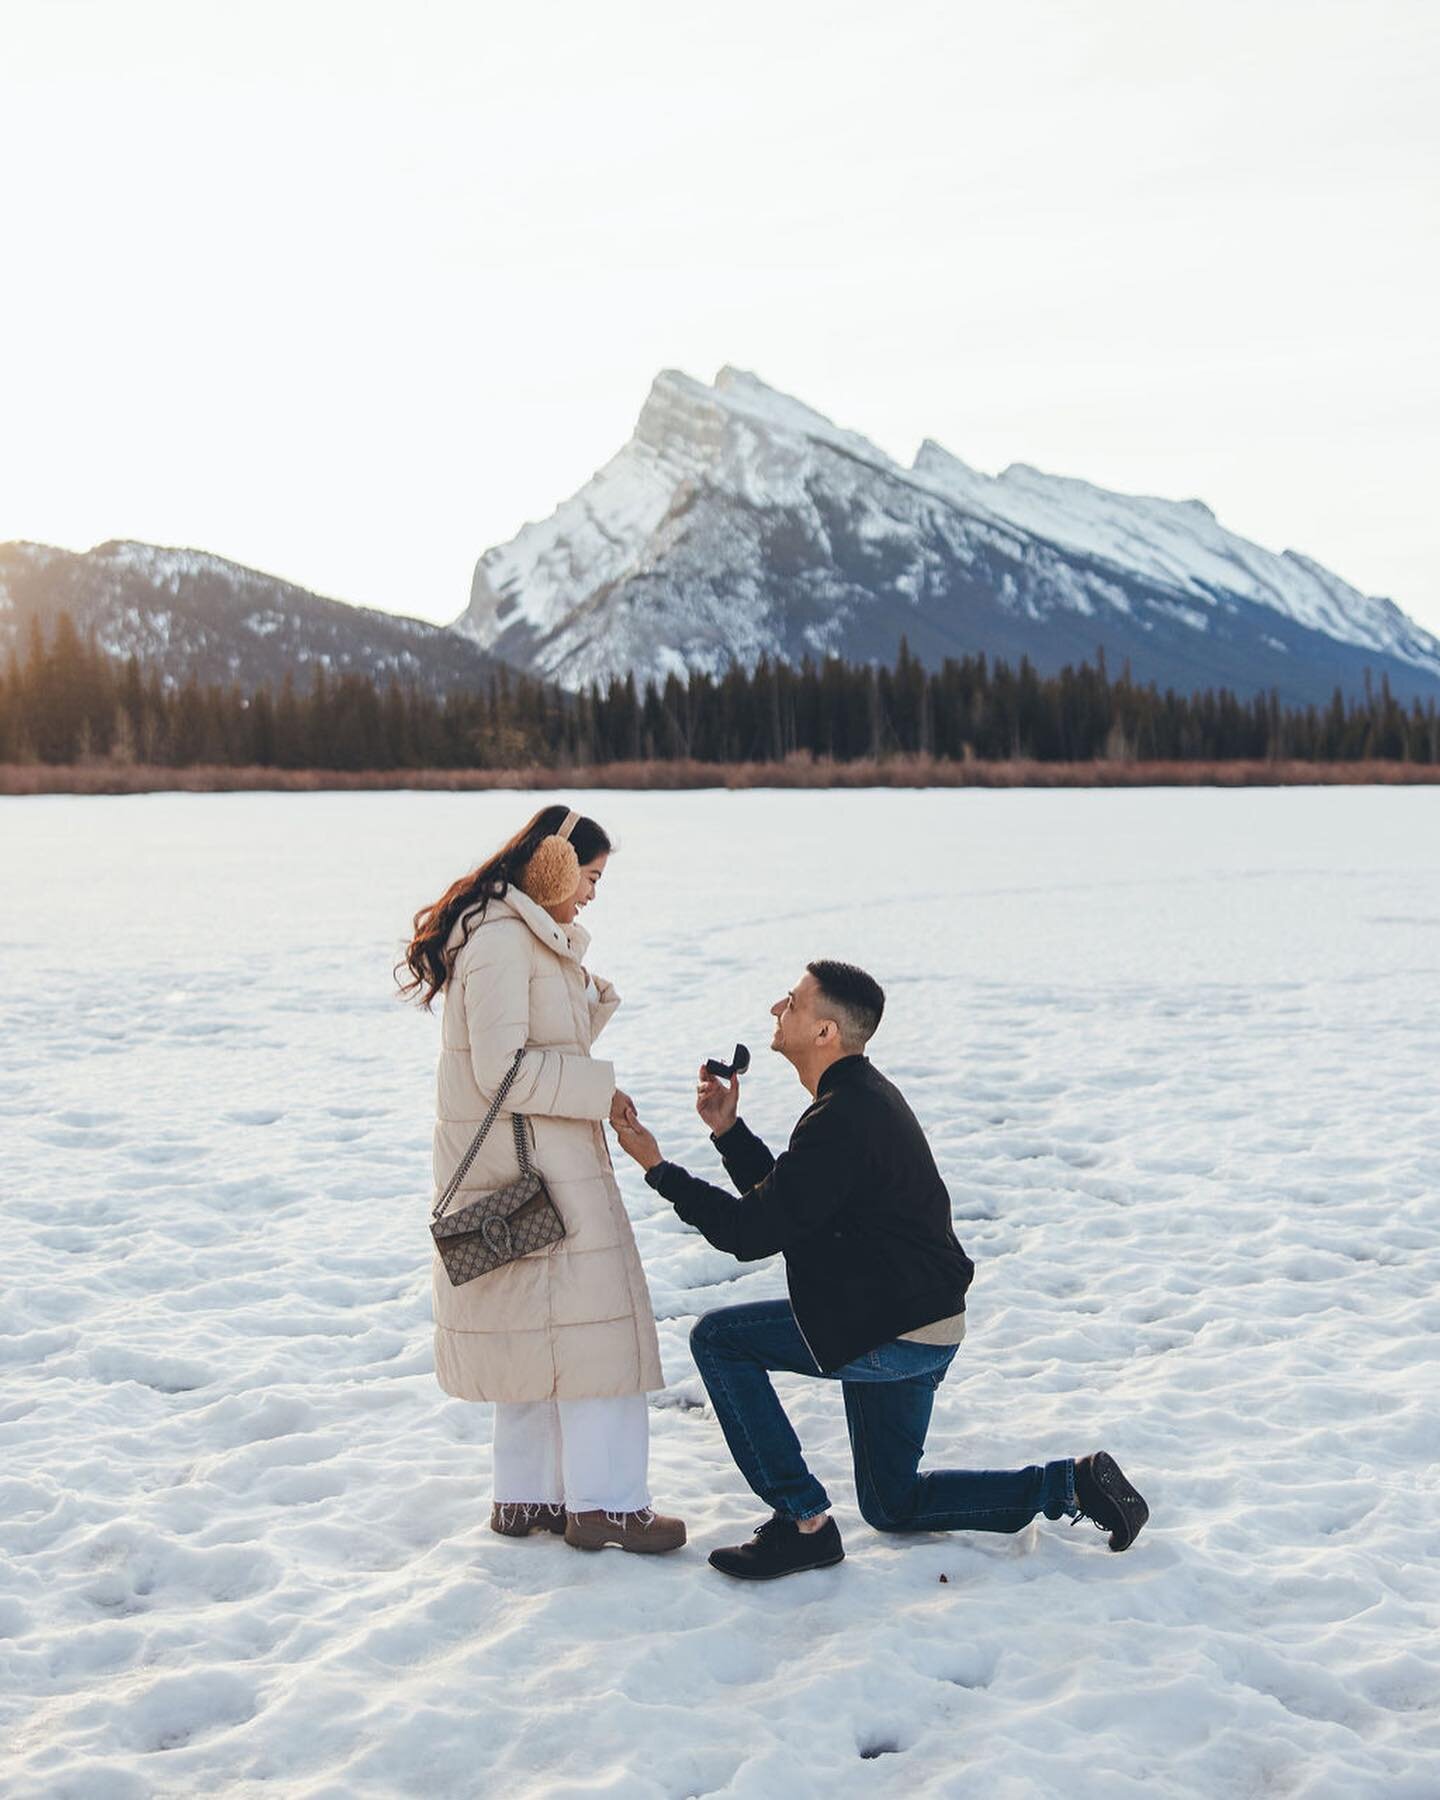 The perfect amount of sunshine and snow for this cozy surprise proposal on Vermillion! 🌞❄️ first time in Banff for these two and it&rsquo;s safe to say it&rsquo;ll be unforgettable. Congratulations O &amp; Y!

&bull;
&bull;
#banff #banffphotographer